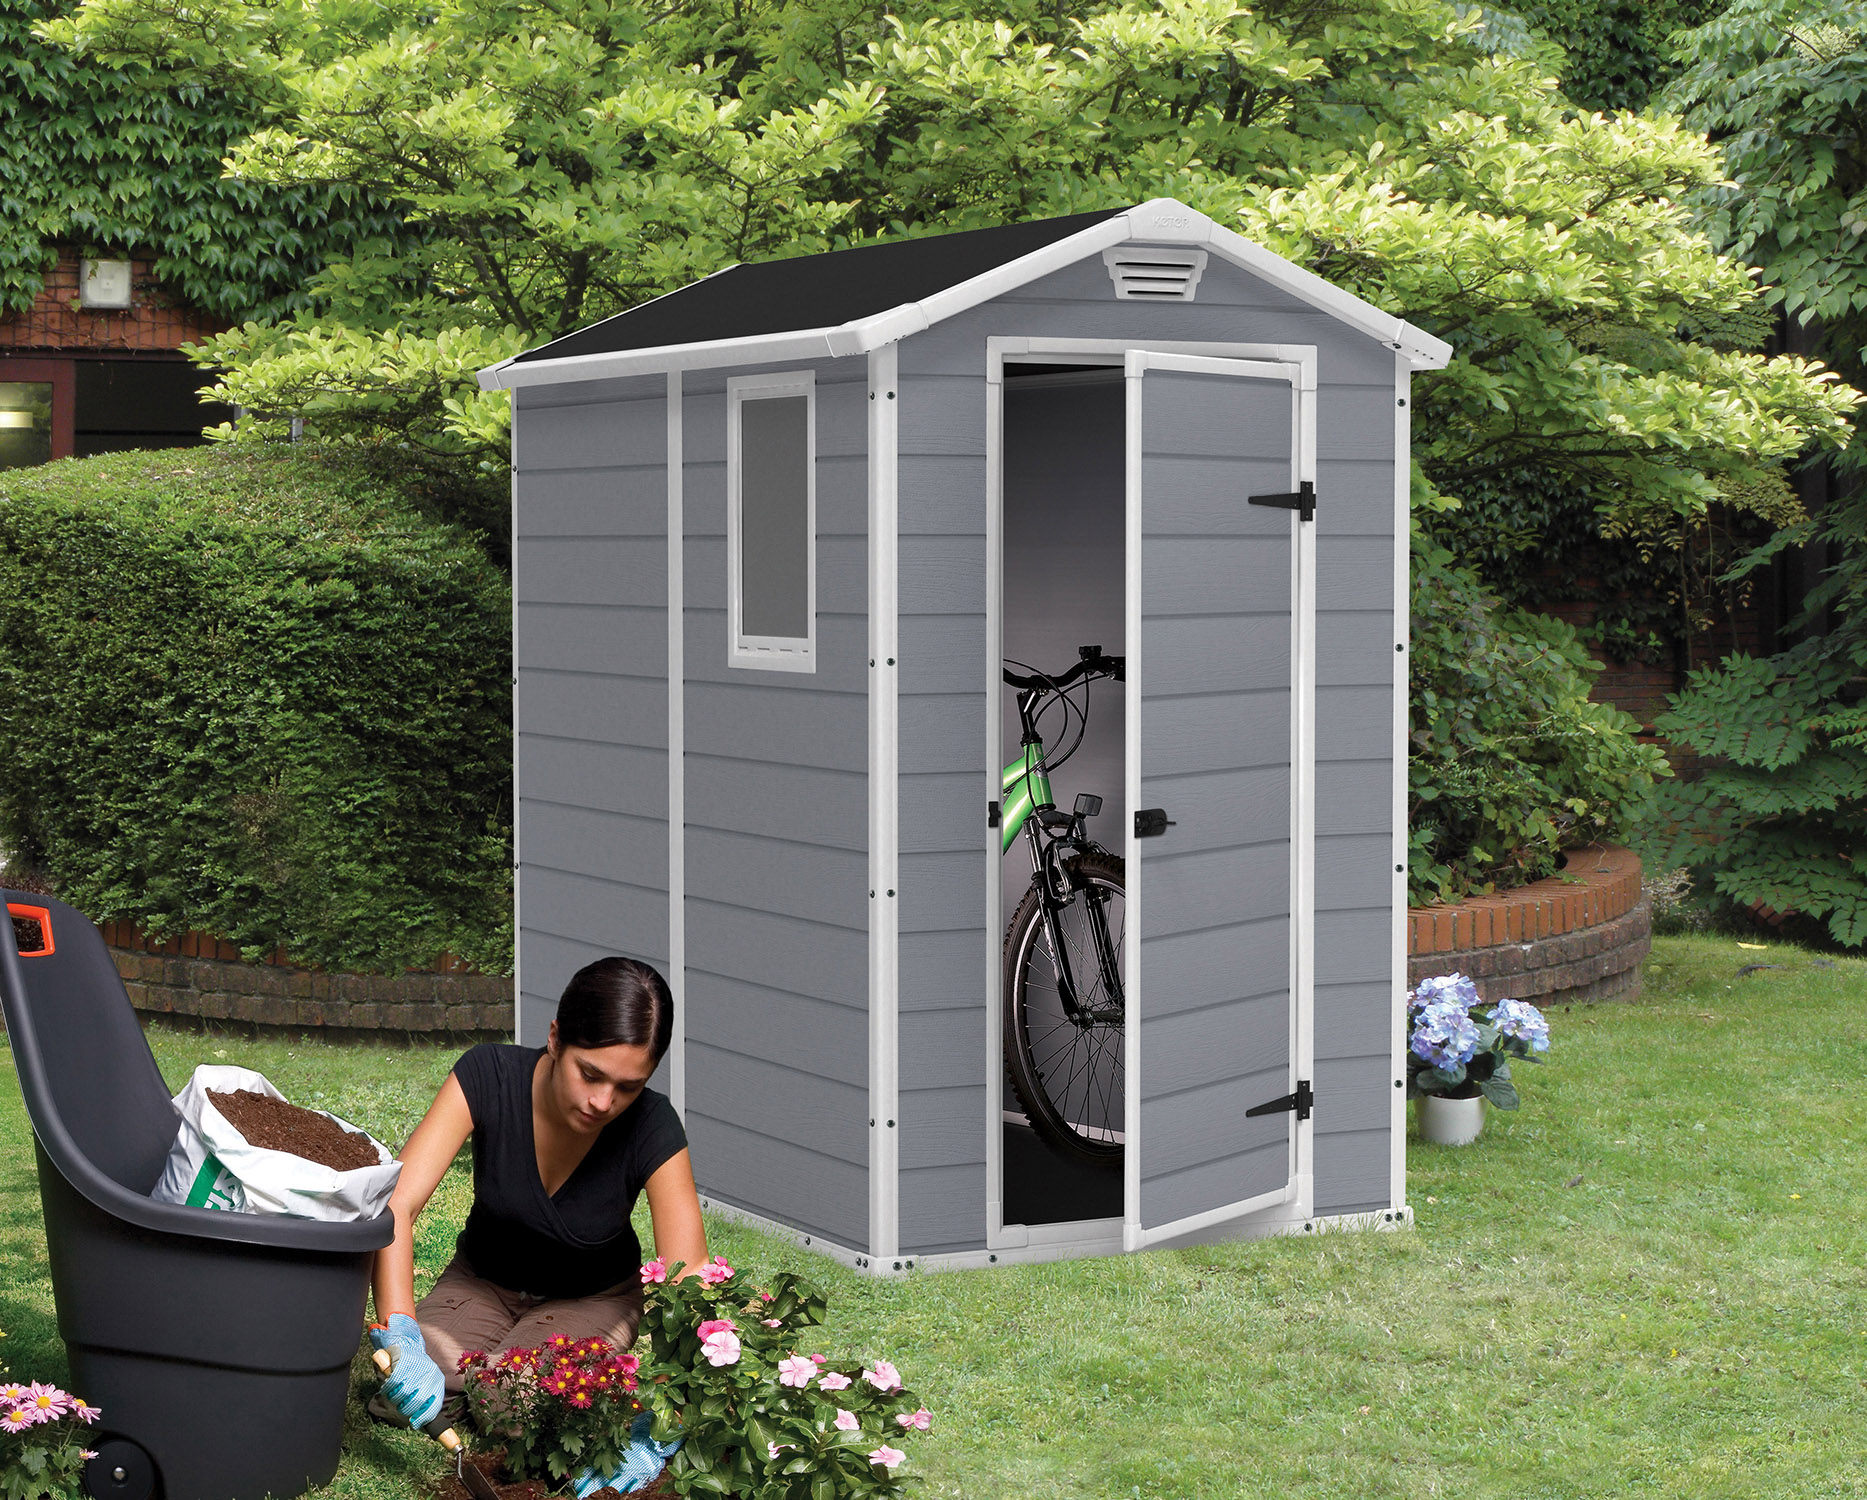 Keter Manor 4' x 6' Resin Storage Shed, All-Weather Plastic Outdoor Storage, Gray and White - image 3 of 10